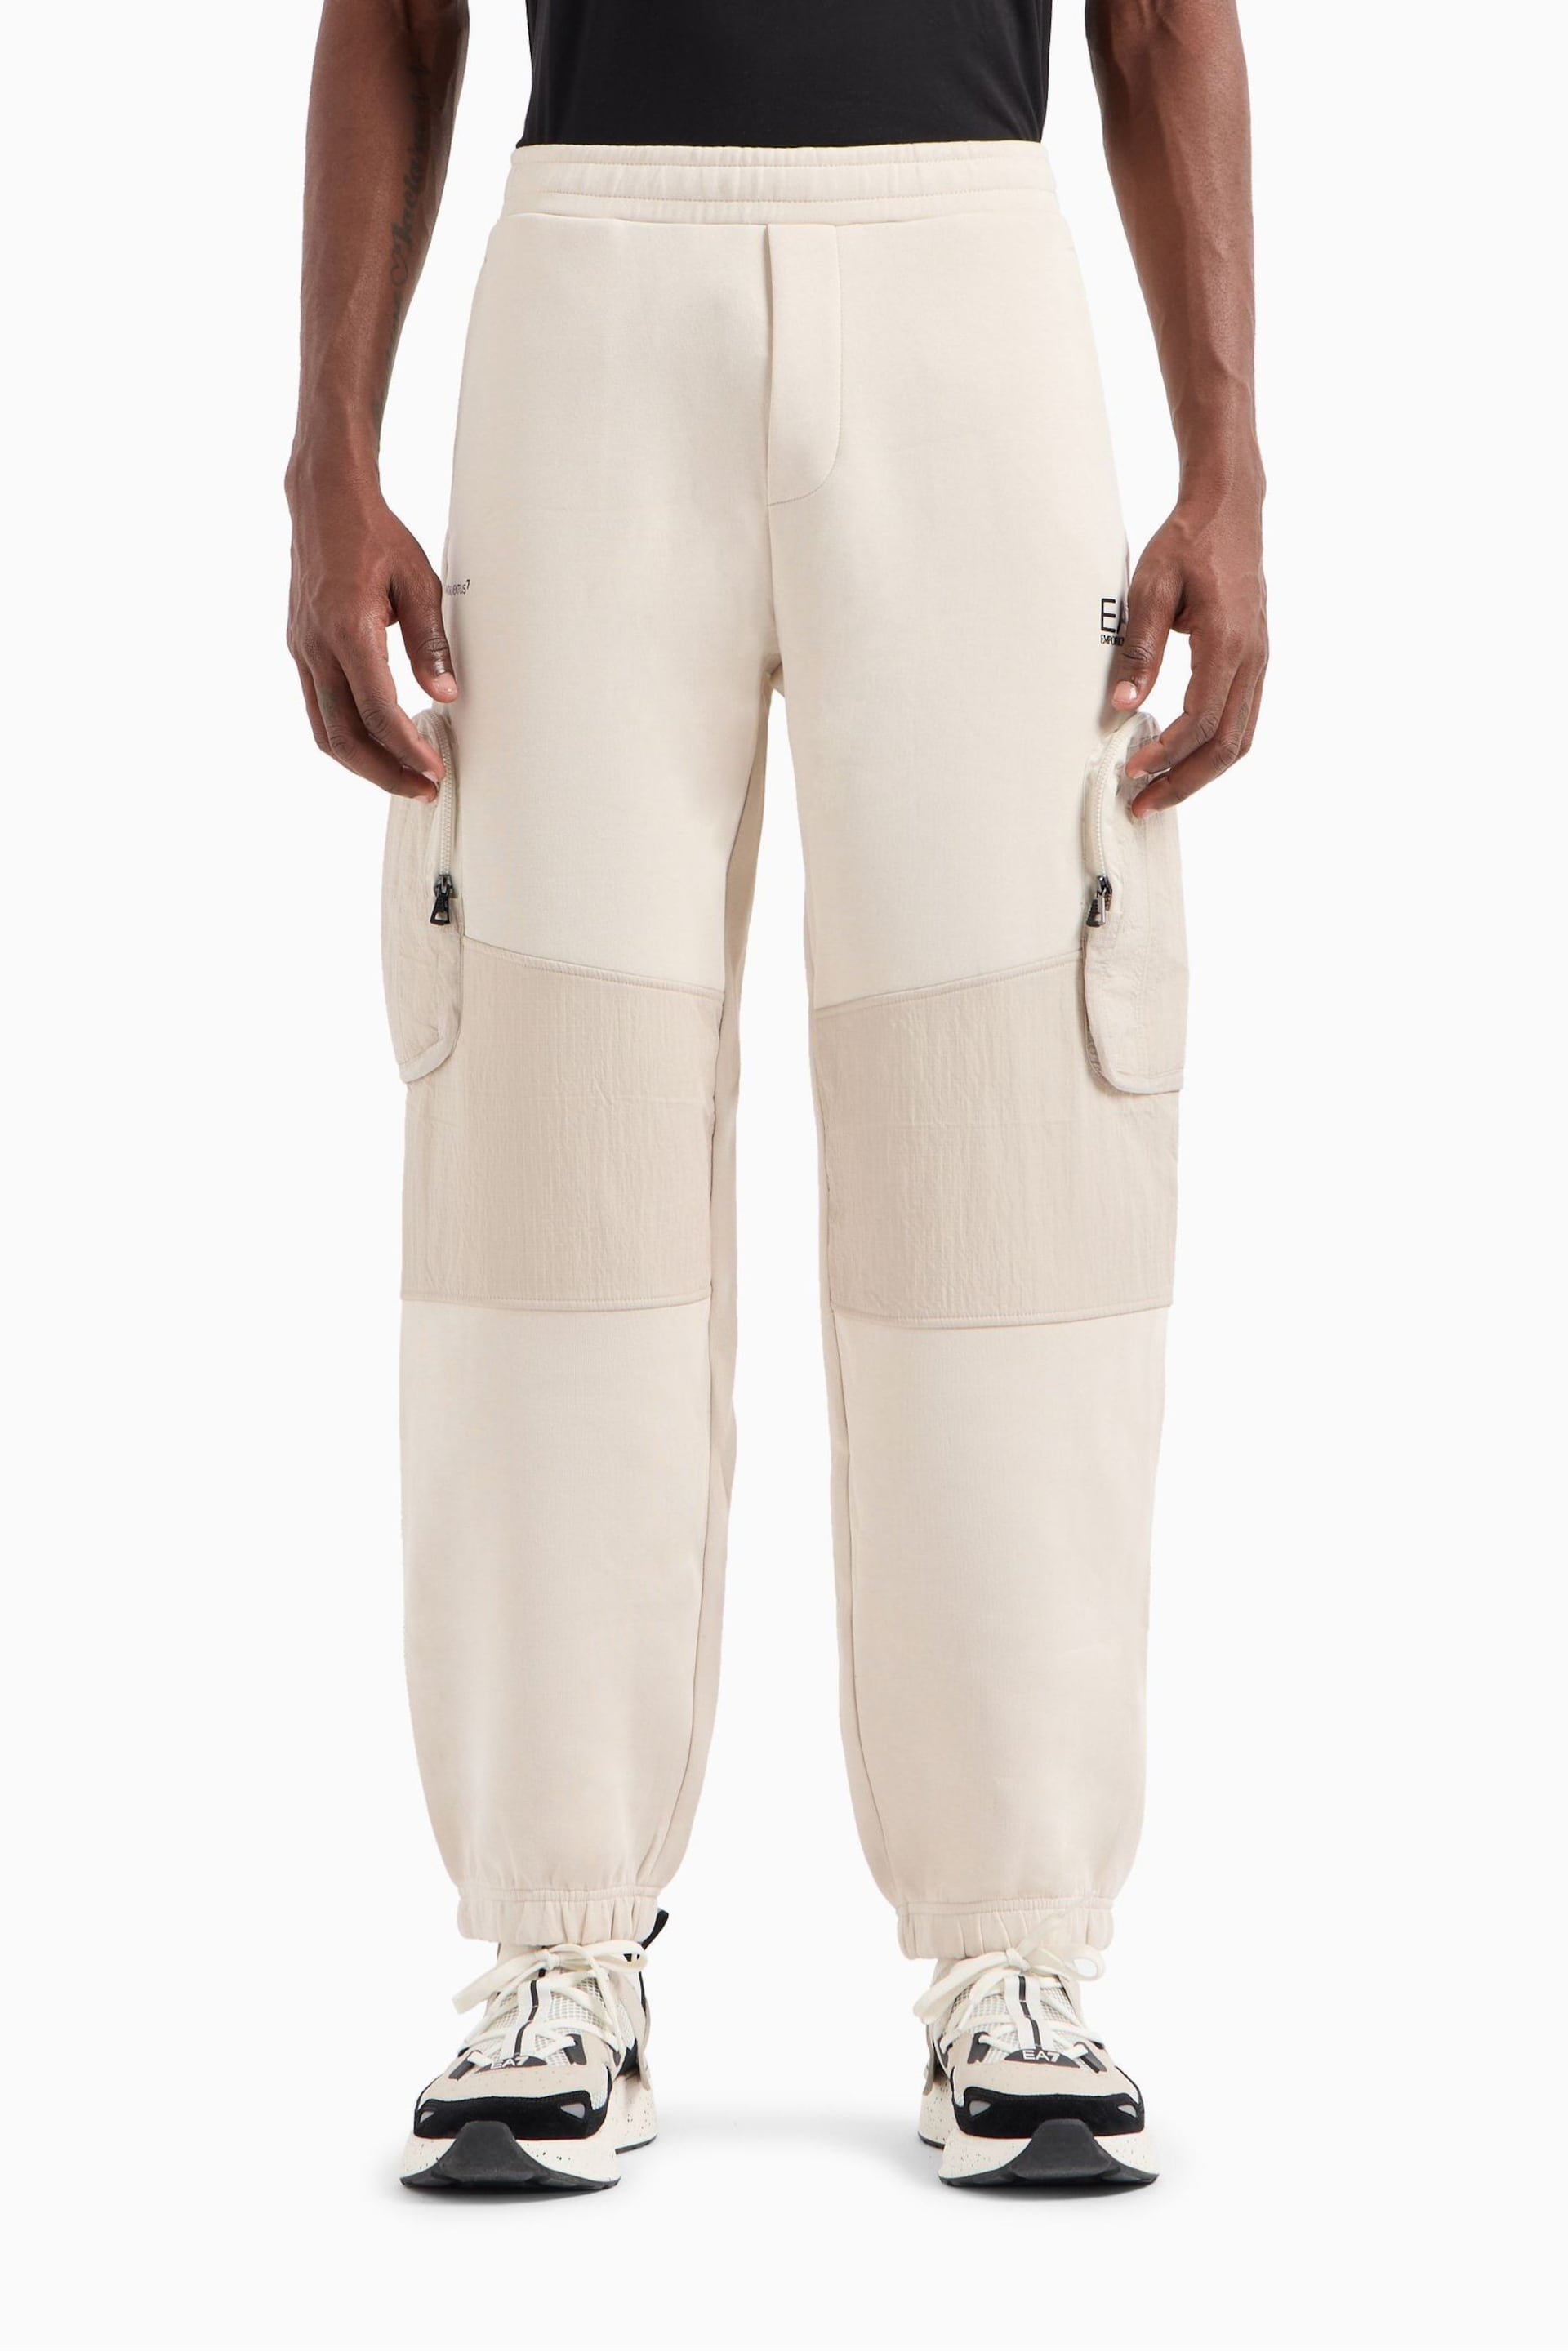 Emporio Armani EA7 Utility Relaxed Fit Cargo Joggers - Image 1 of 5